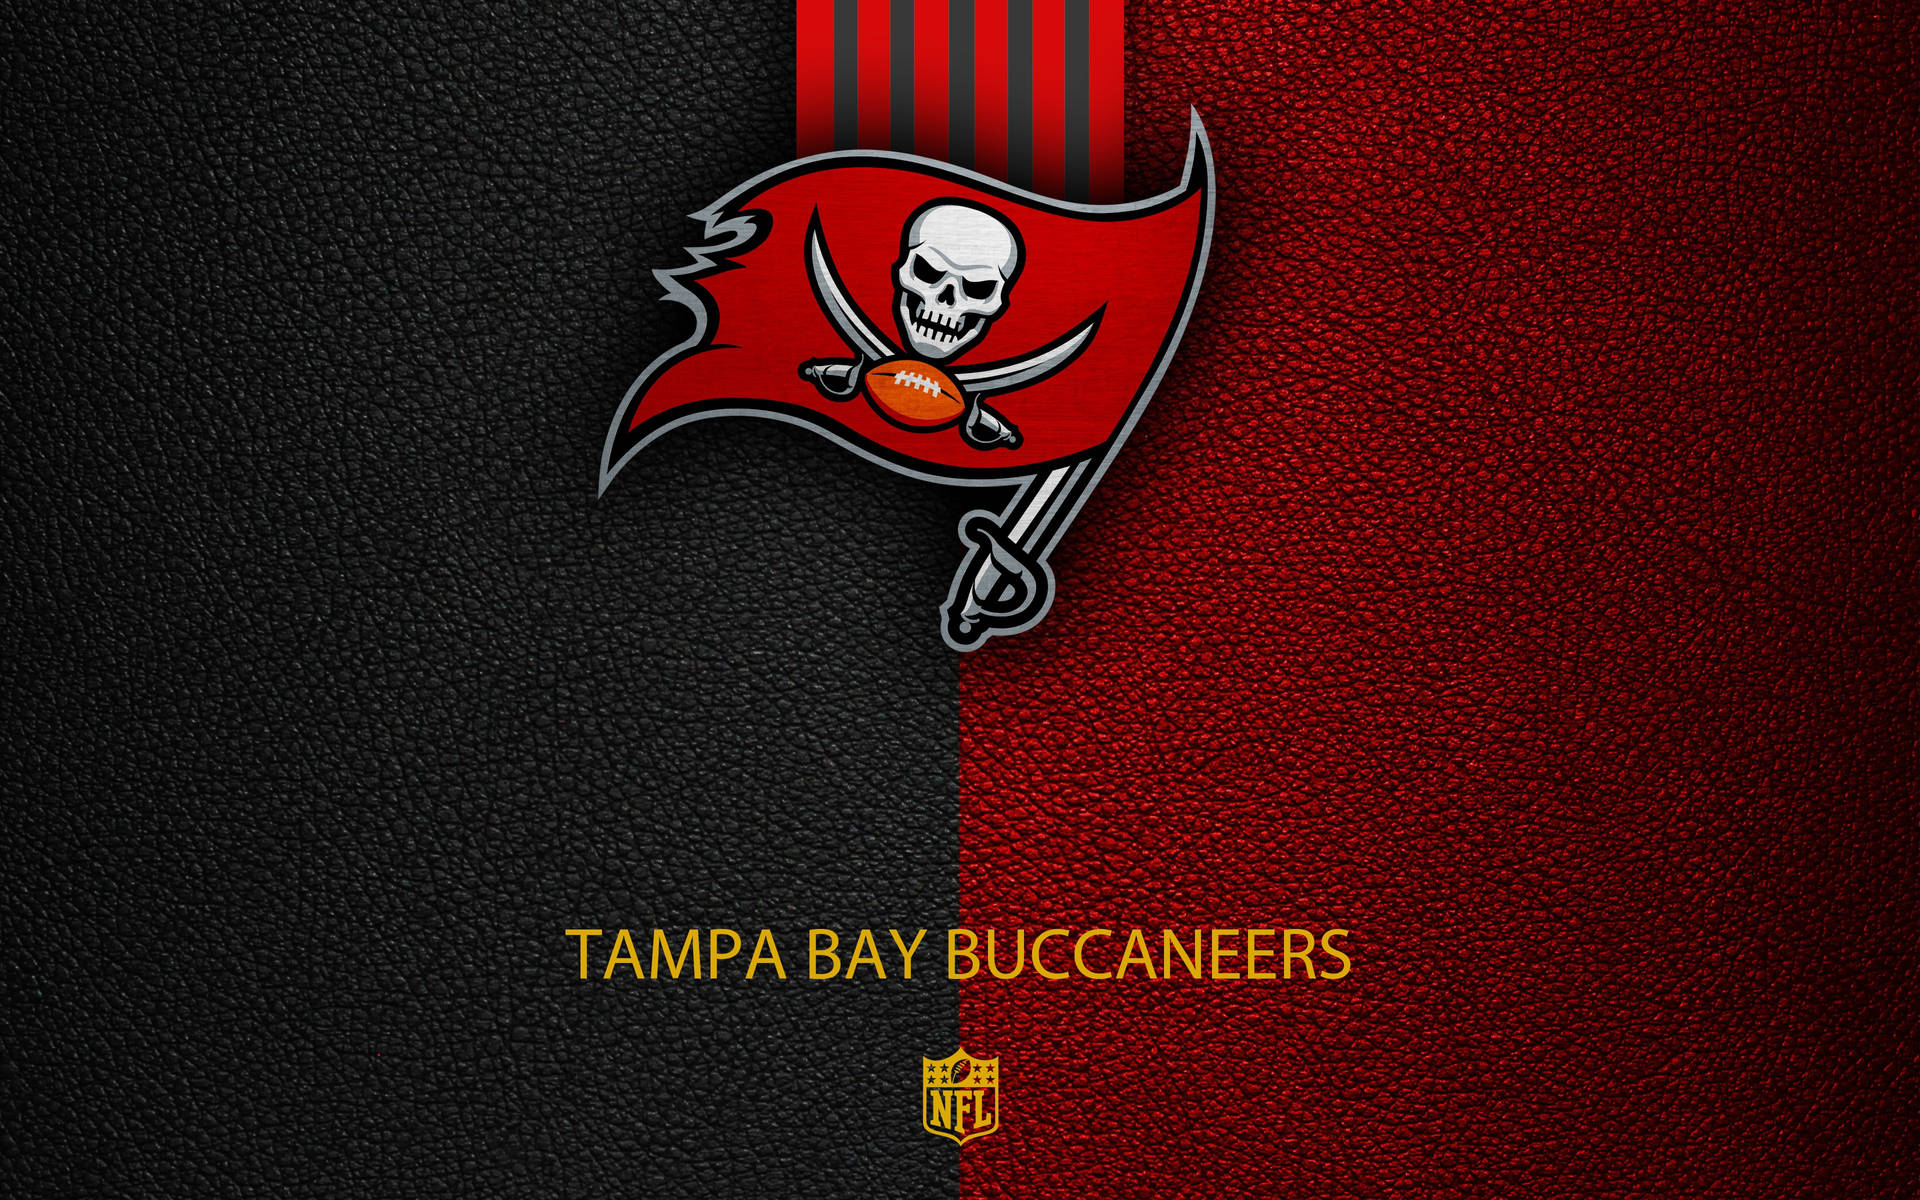 Tampa Bay Buccaneers Wallpaper Background For